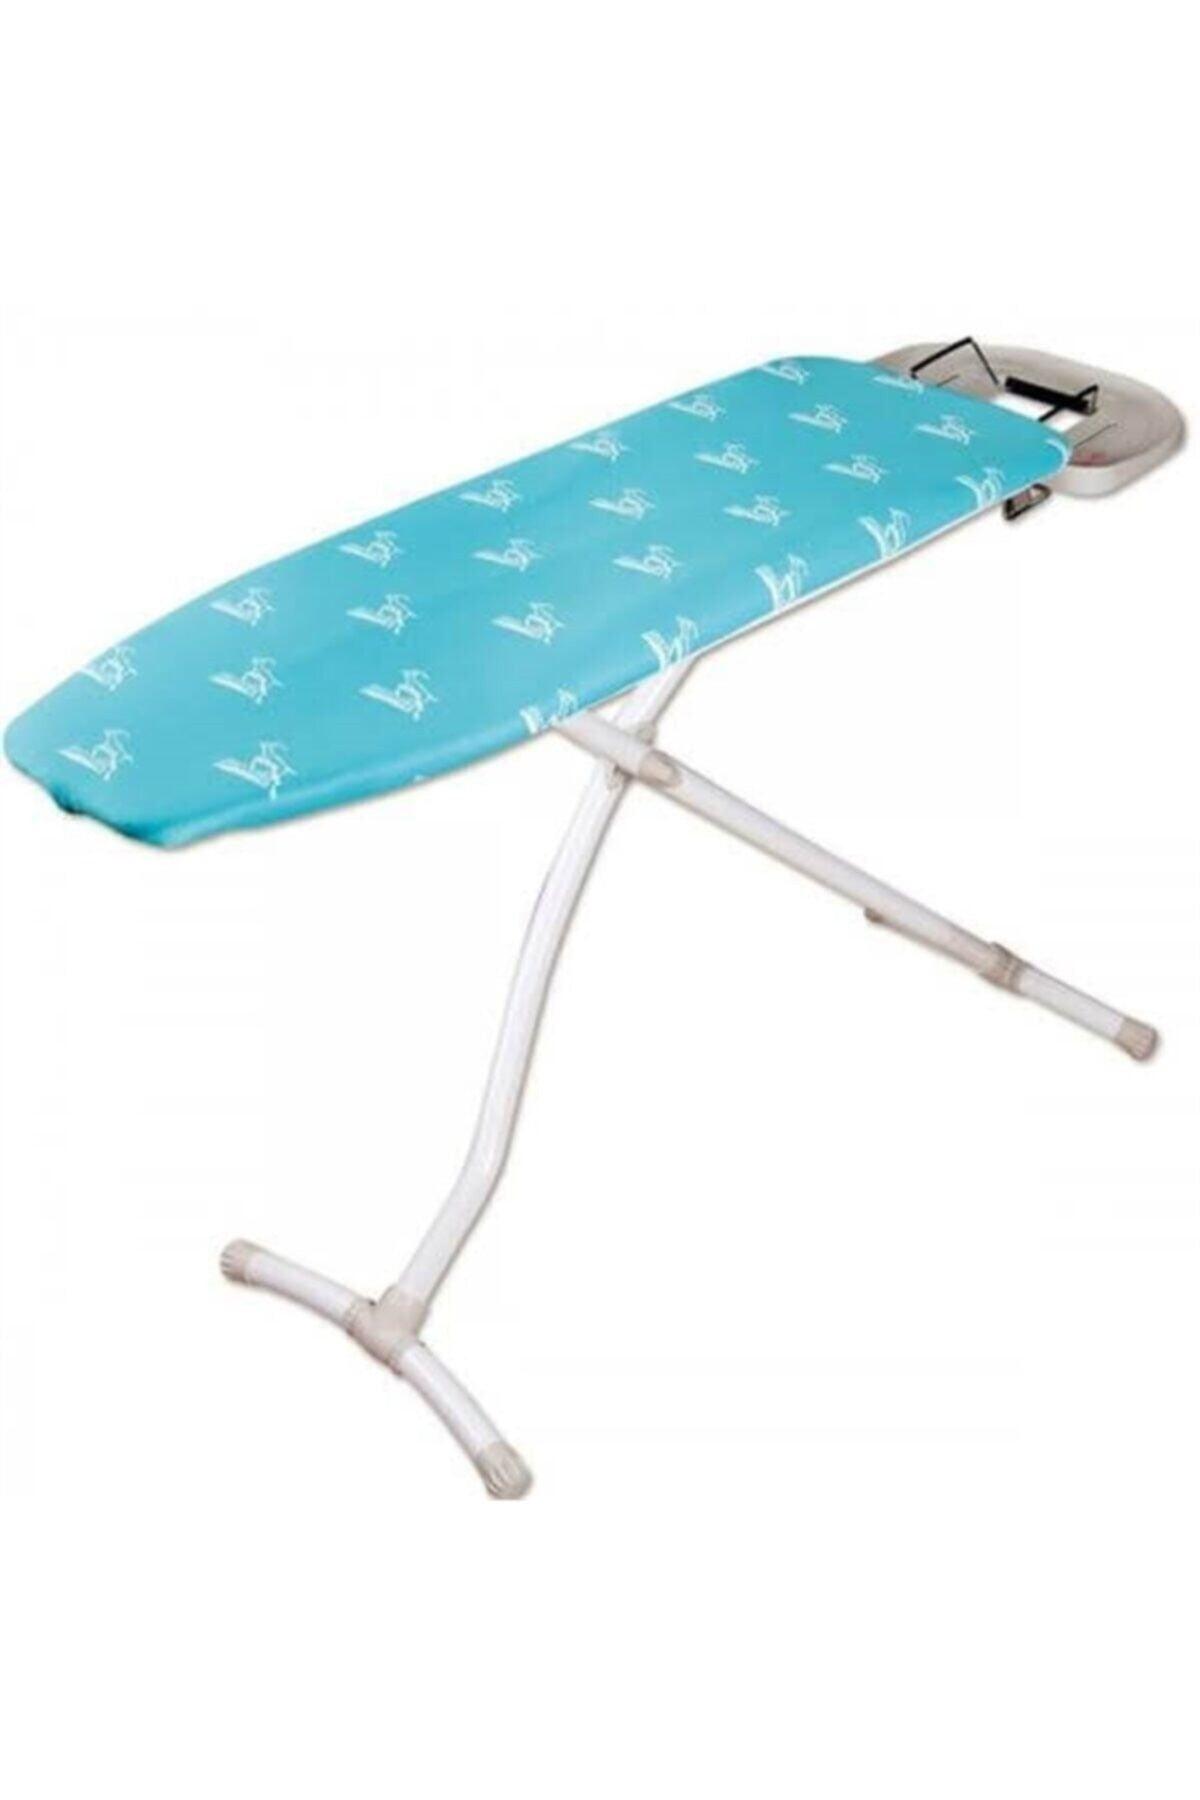 135x50cm Felt Turquoise Ironing Board Cover Cloth/Cover 900 - Swordslife